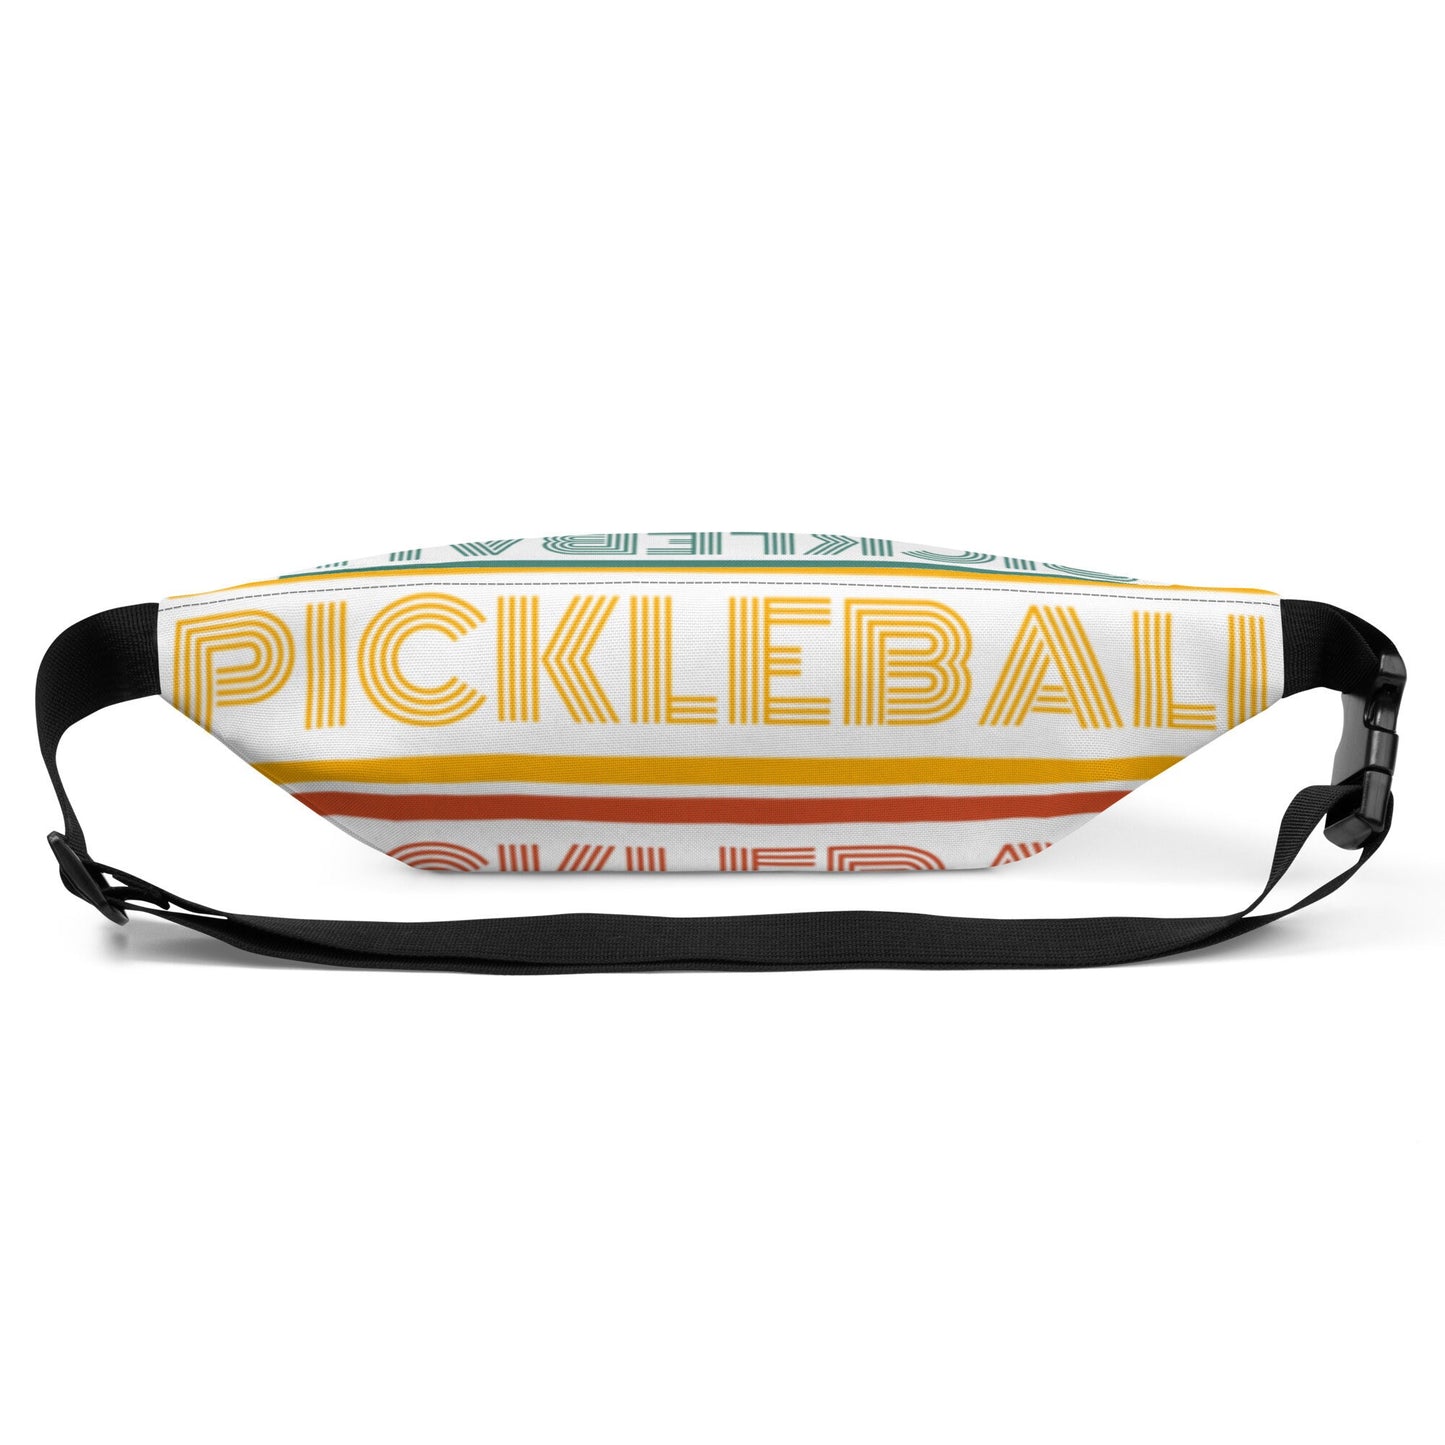 Fanny Pack, Pickleball Fanny Pack, Pickleball Bag, Sports Fanny Pack, Cross Body Bag, Pickleball Player, Pickleball Gifts